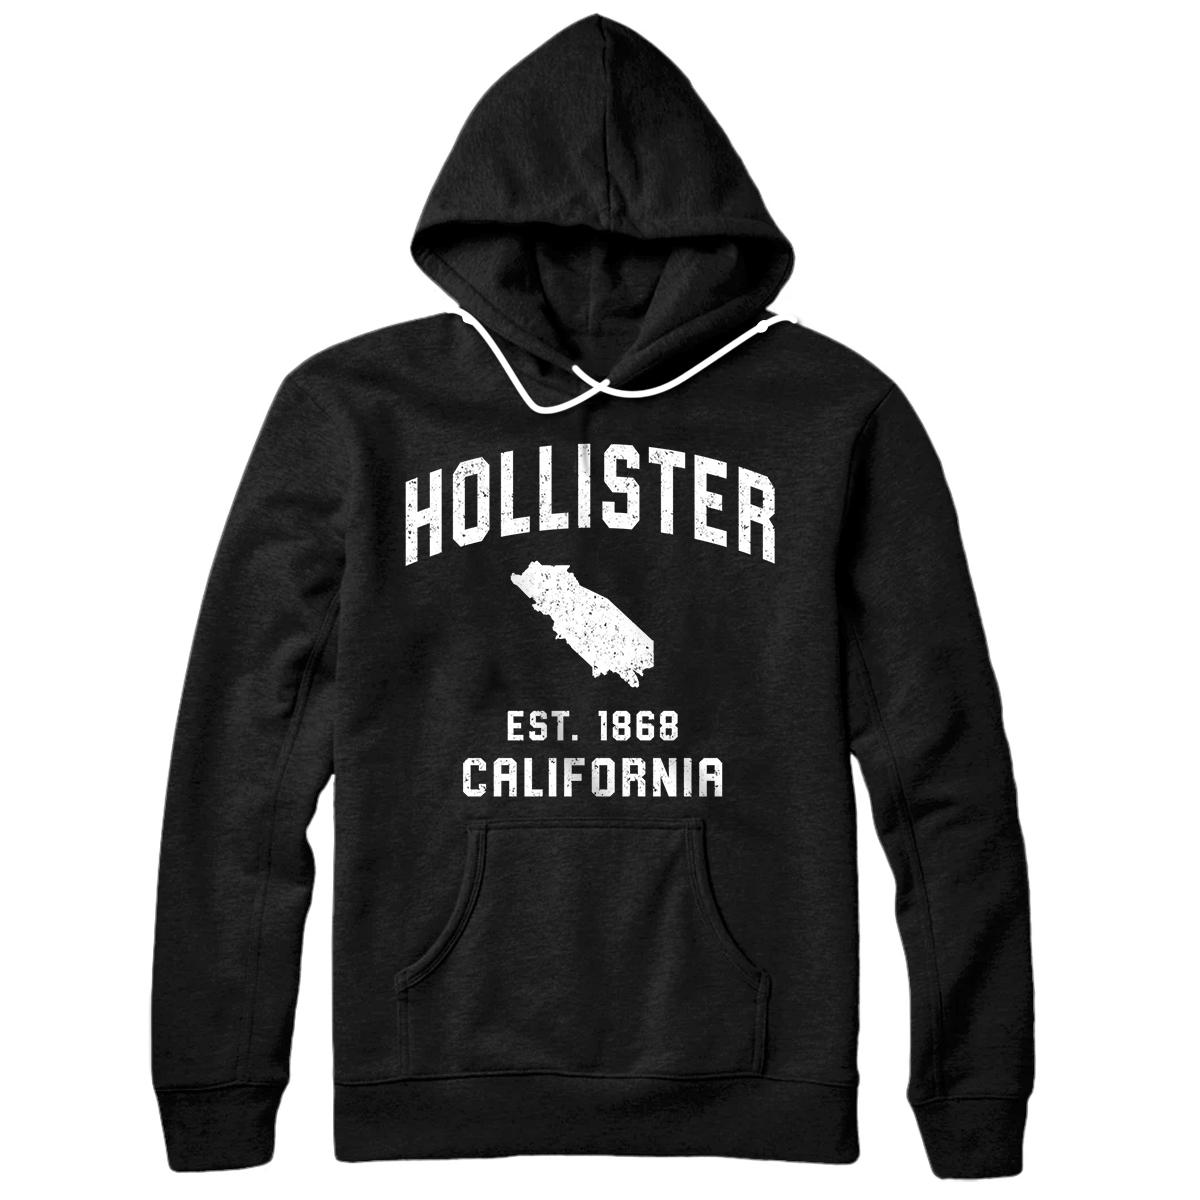 Personalized Vintage Hollister California EST. 1868 Gift for Men Women Pullover Hoodie